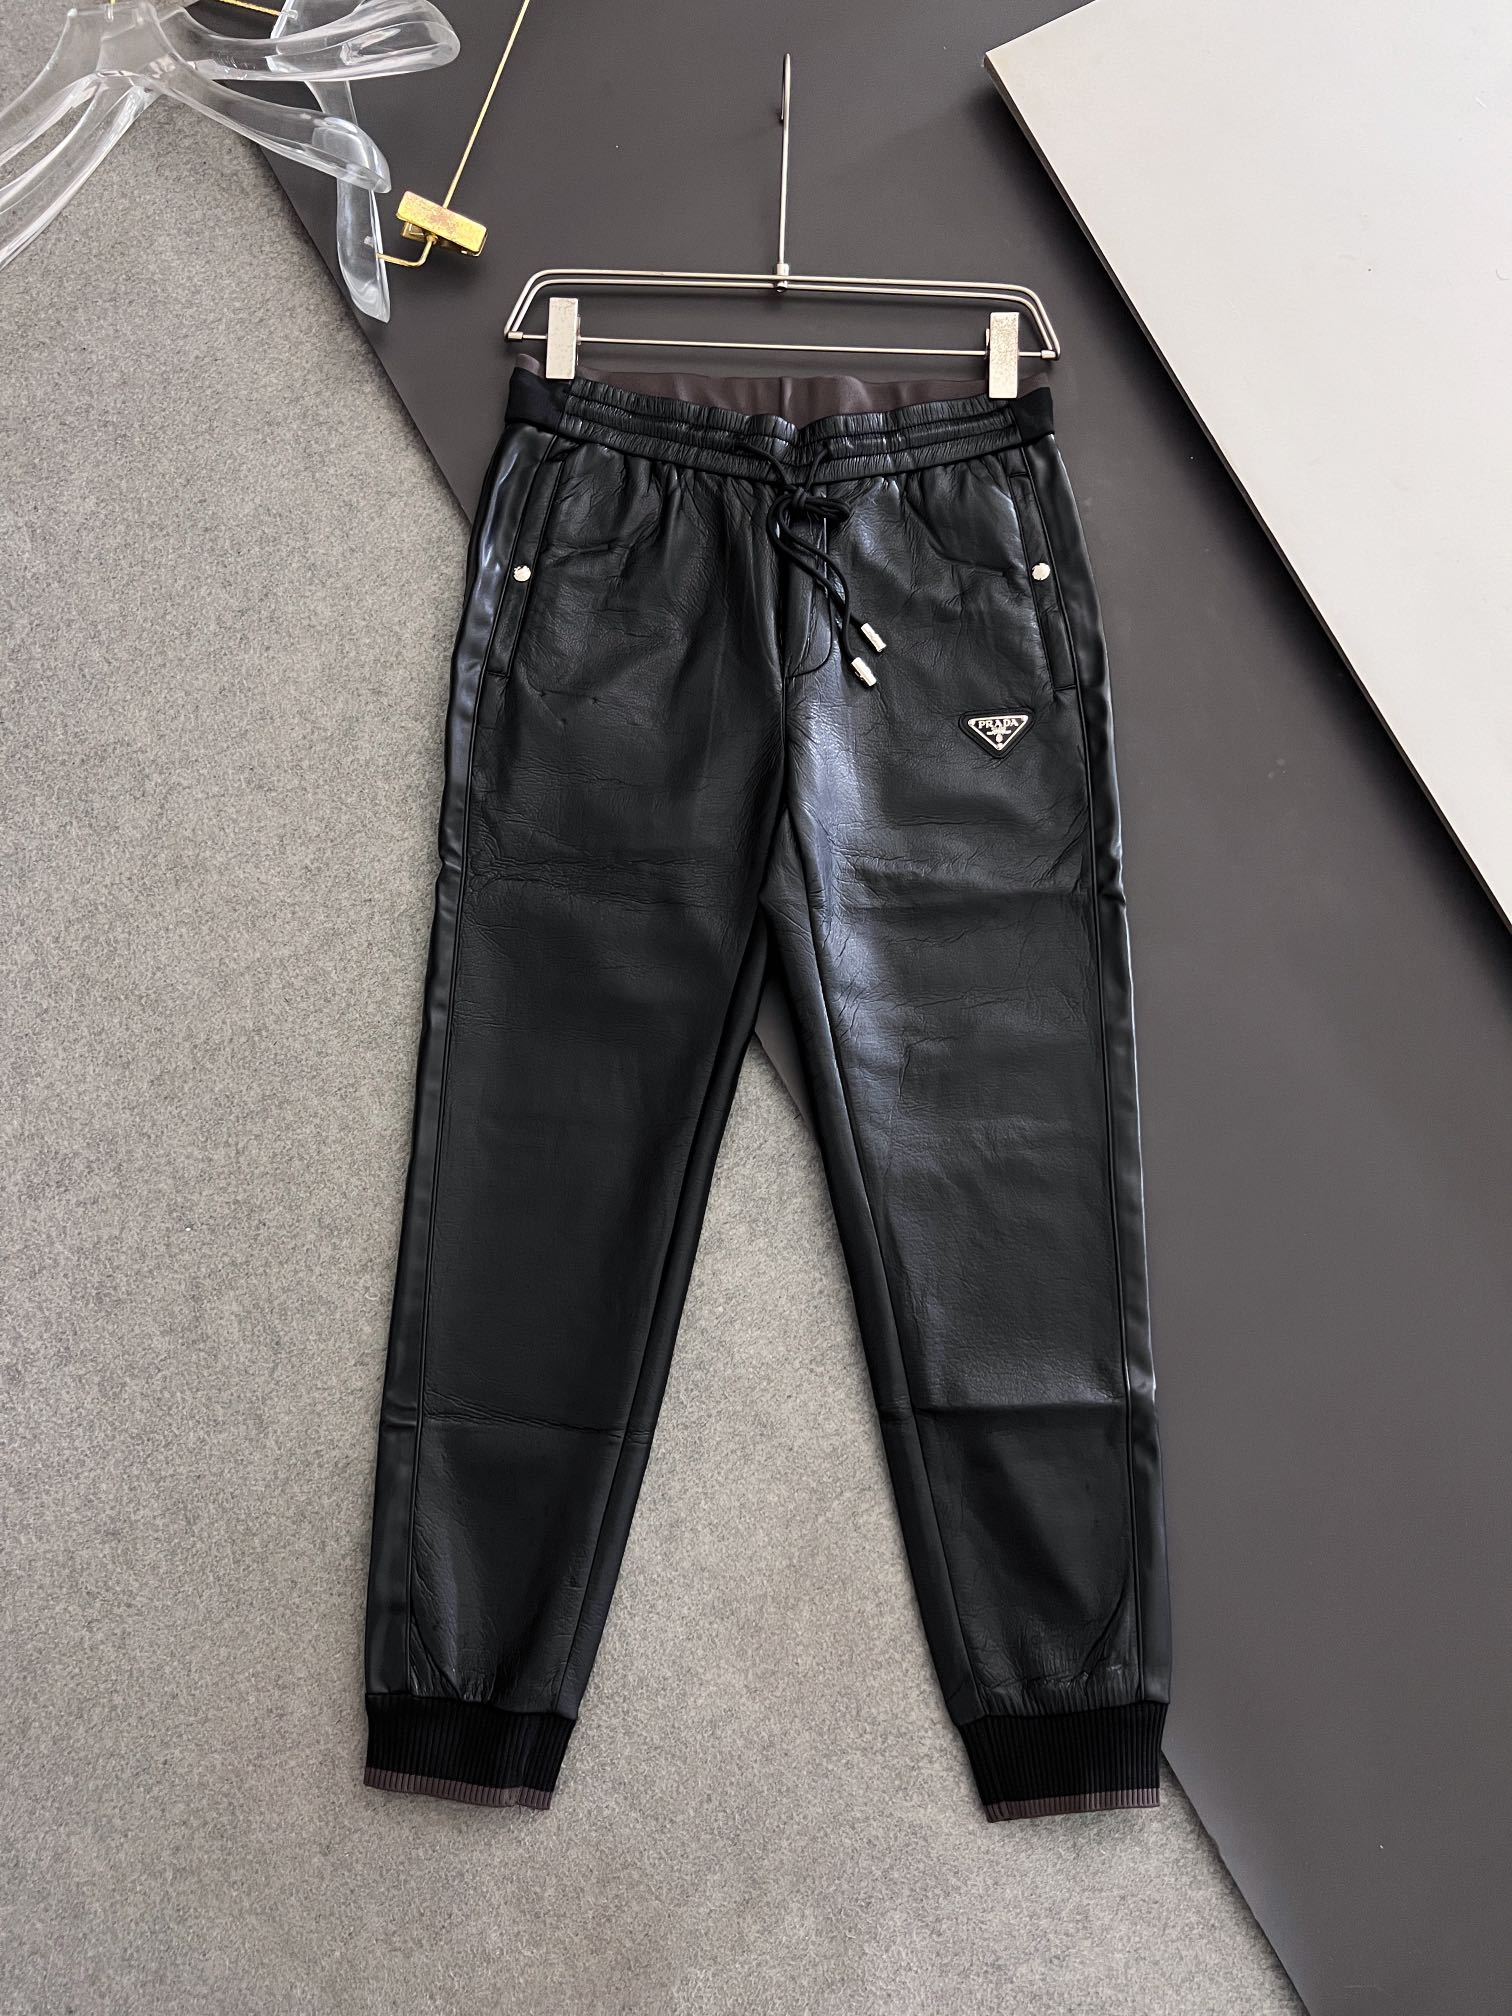 Prada Clothing Pants & Trousers Black Red Silver Splicing Men Genuine Leather Polyester PU Rubber Fall/Winter Collection Fashion Casual